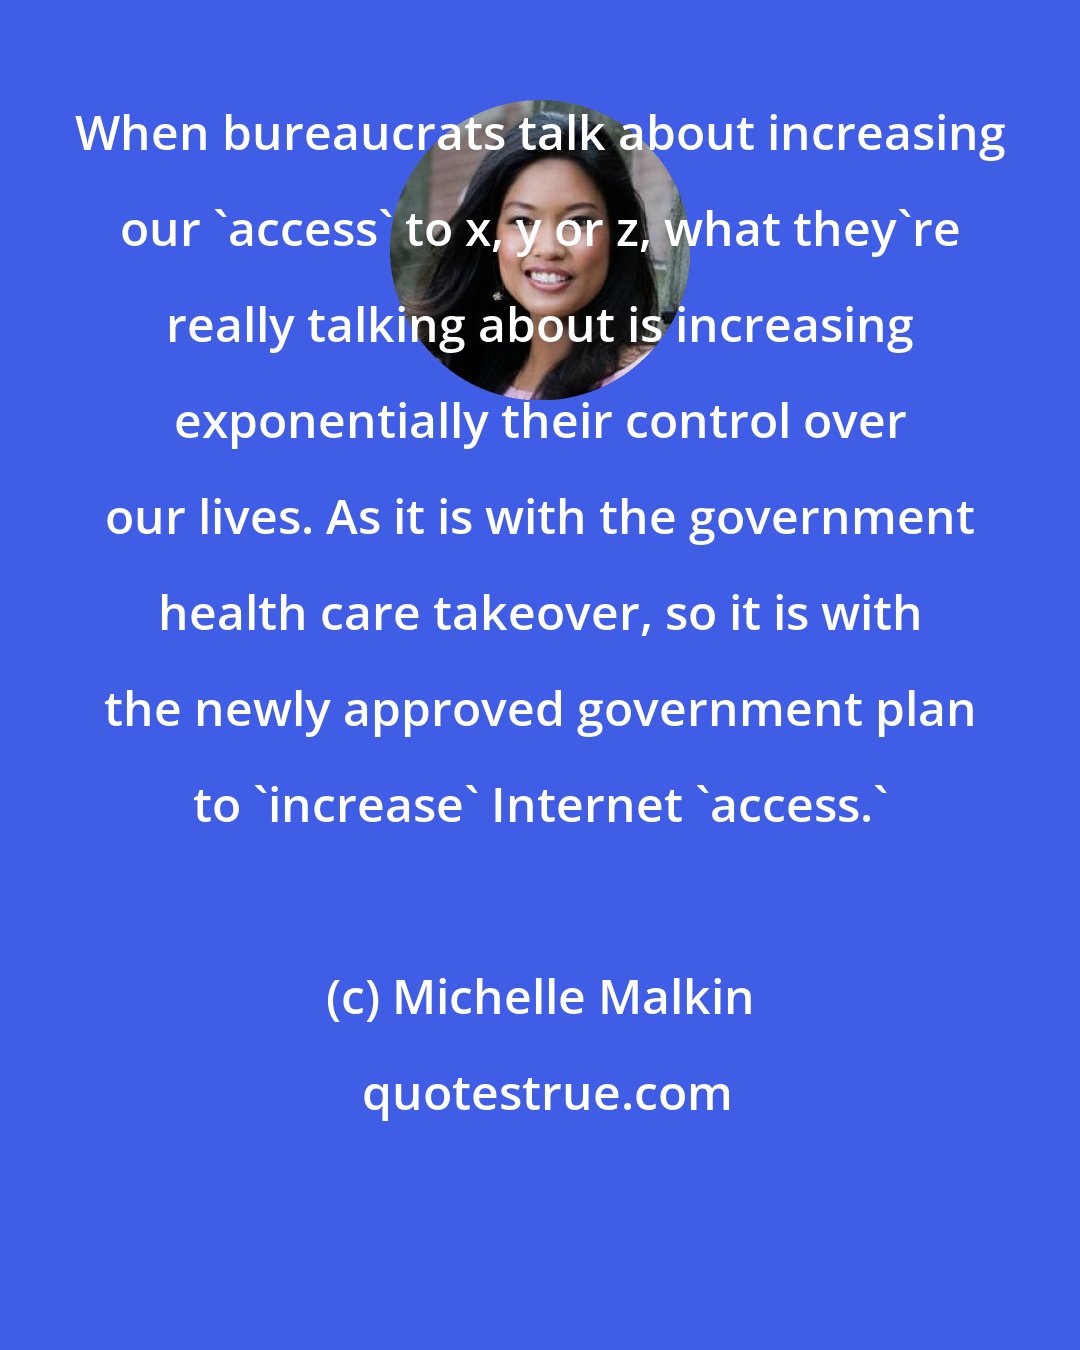 Michelle Malkin: When bureaucrats talk about increasing our 'access' to x, y or z, what they're really talking about is increasing exponentially their control over our lives. As it is with the government health care takeover, so it is with the newly approved government plan to 'increase' Internet 'access.'